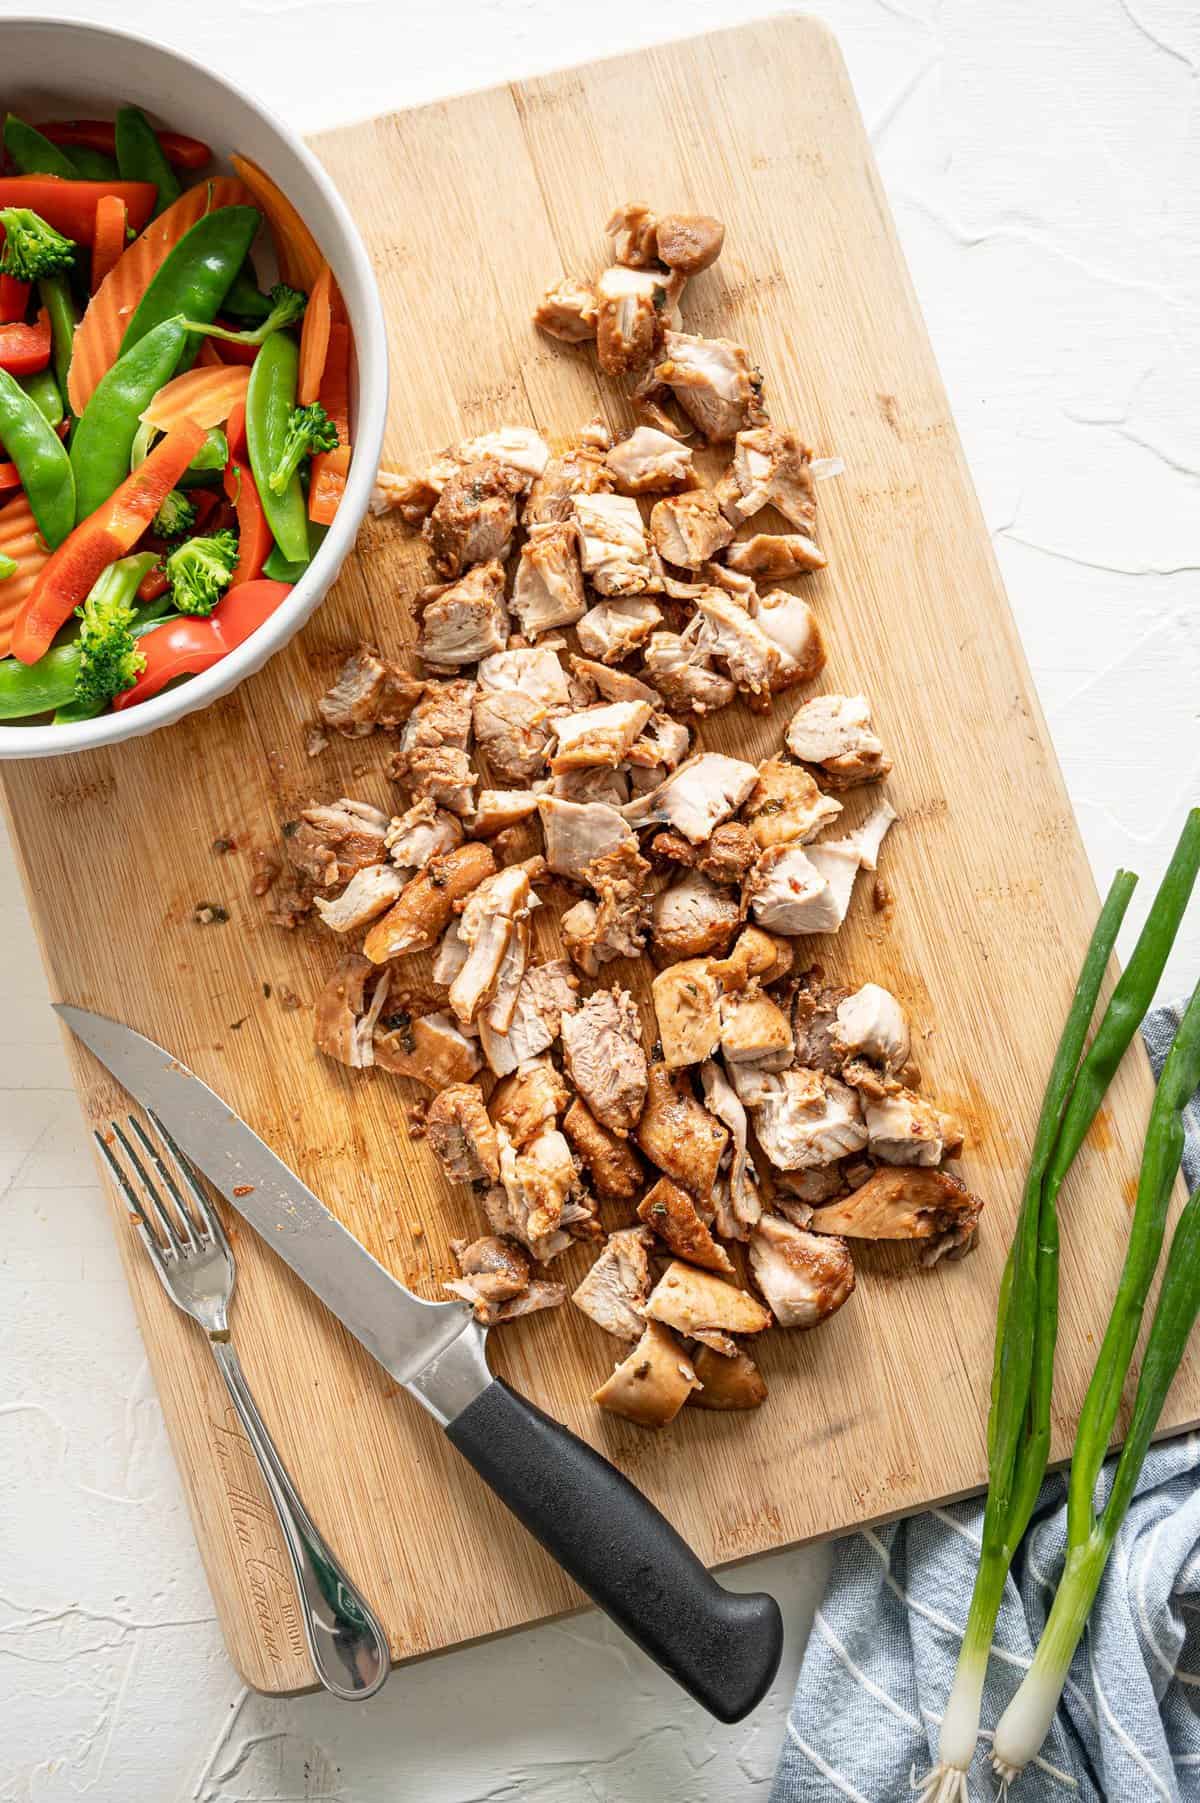 Diced chicken on a wooden cutting board with a bowl of stir-fry veggies.